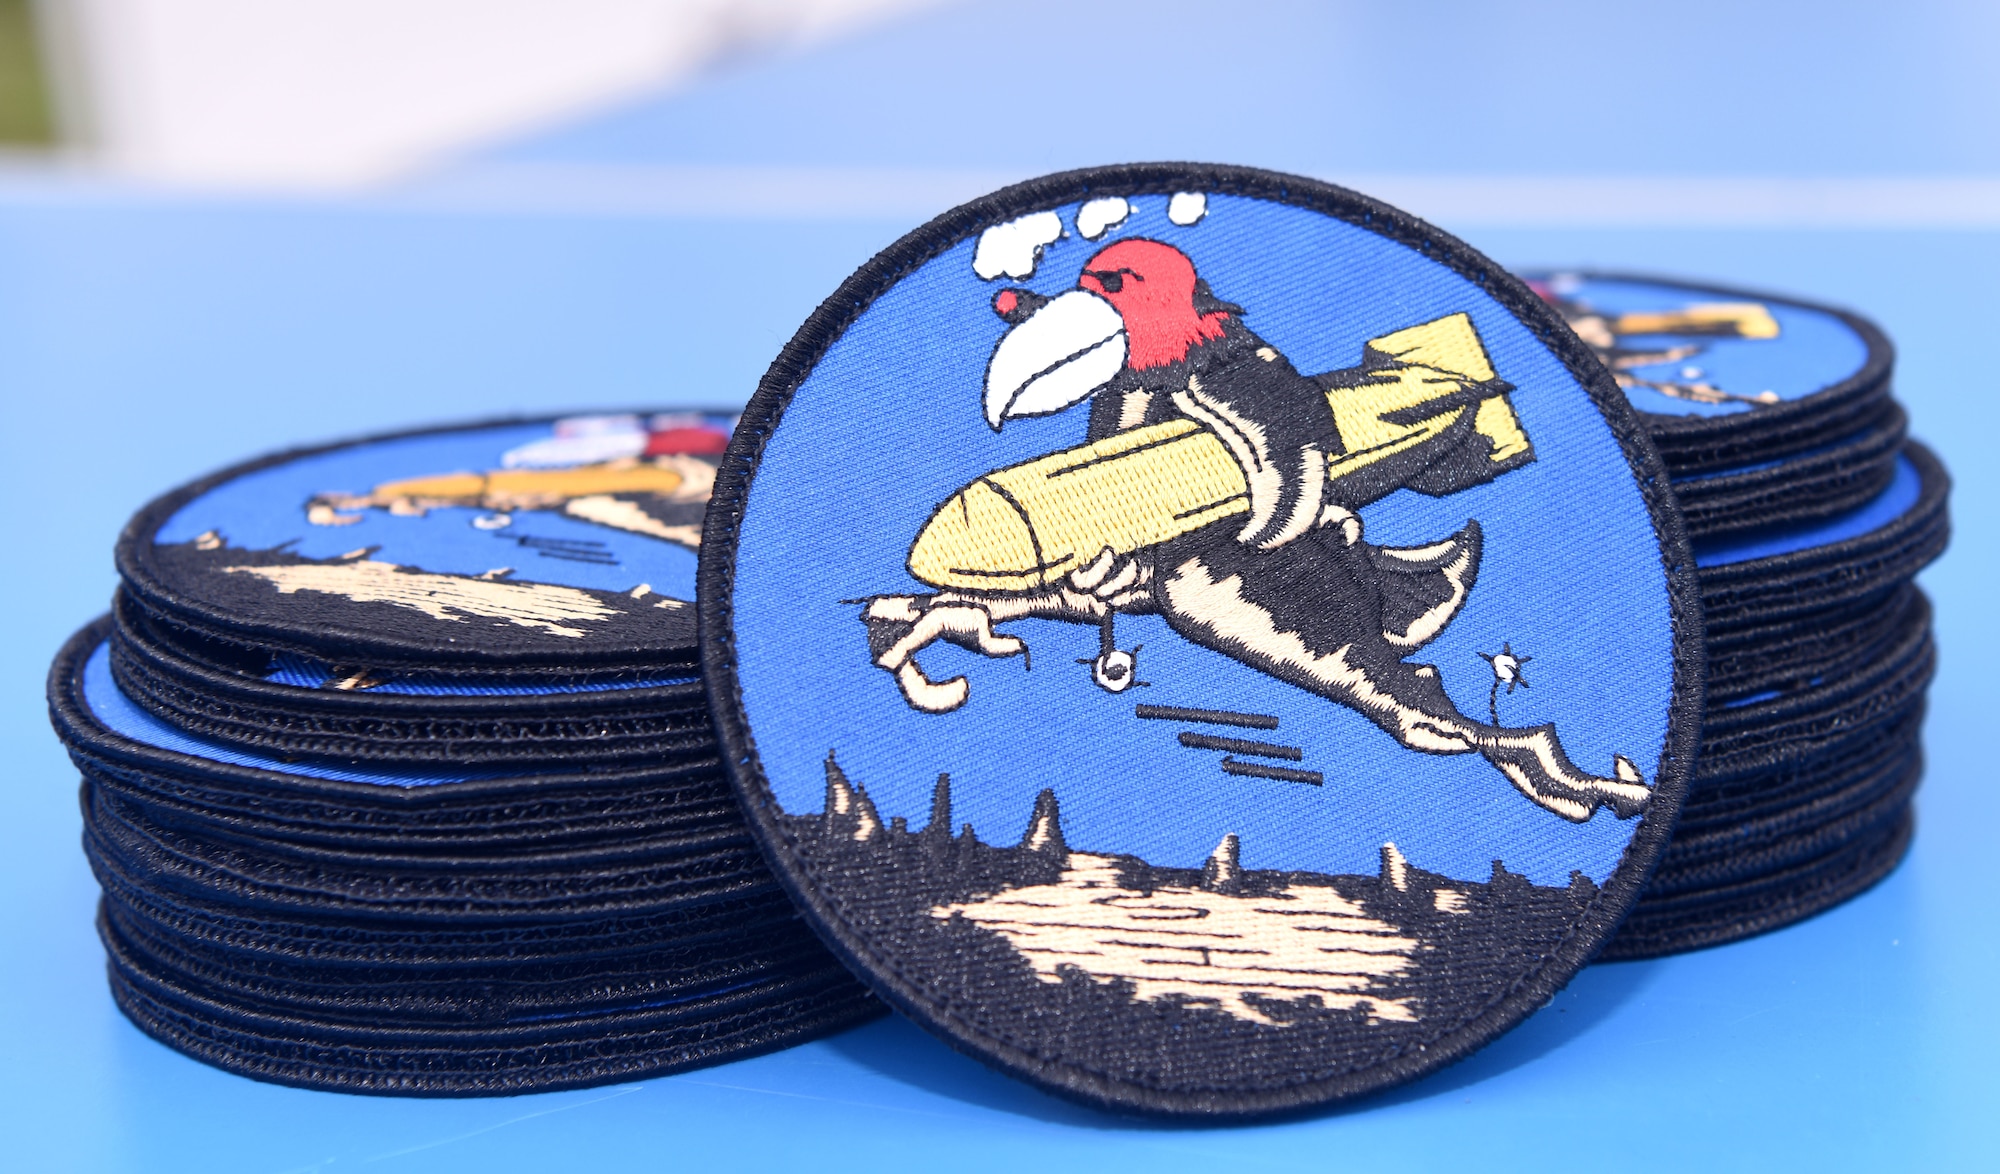 Heritage patches, known as the Buzzard patch, are ready to be presented to pilots and boom operators who have completed mission certification training at the 100th Bomb Group Memorial Museum, Thorpe Abbotts, England, Oct. 14, 2022. Thorpe Abbotts was home to the original 351st Bomb Squadron and 100th Bomb Group during World War II. Only those who have completed MCT can wear the patch on Fridays. (U.S. Air Force photo by Karen Abeyasekere)